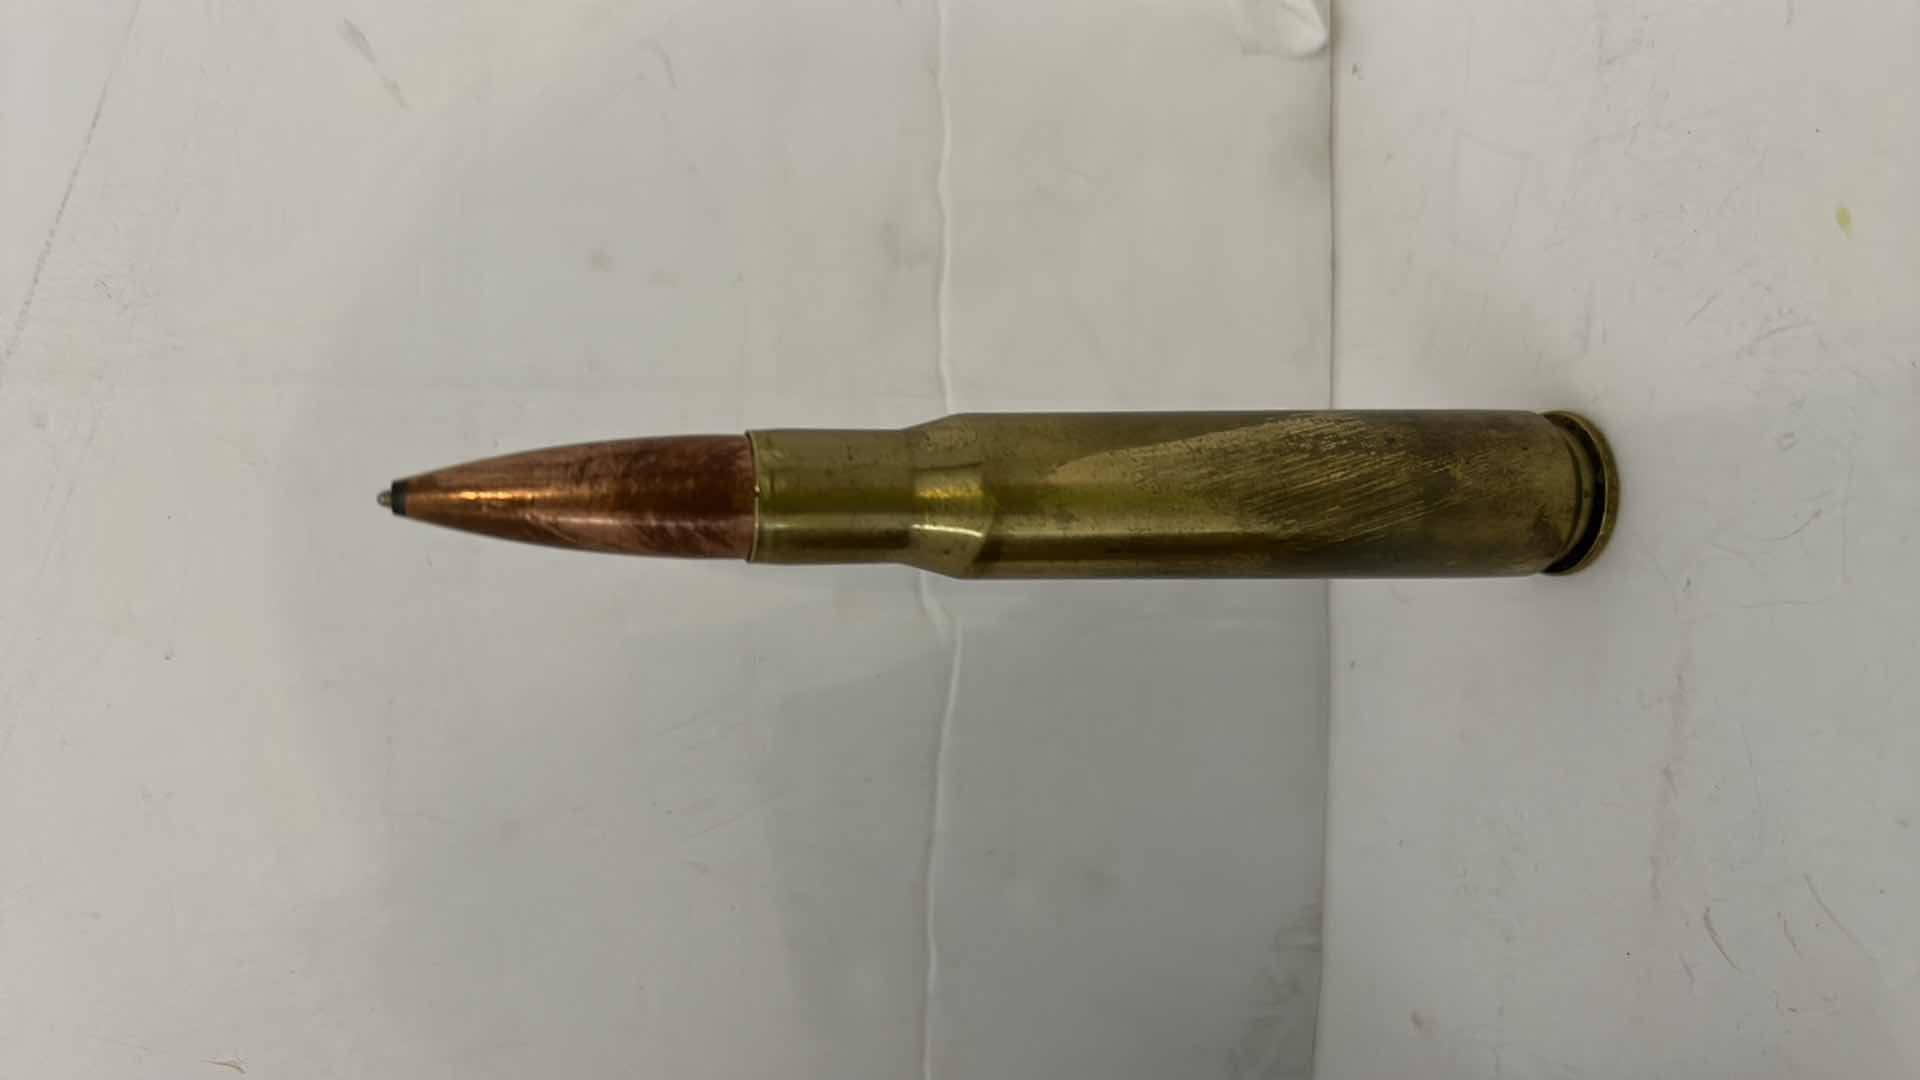 Photo 4 of REAL .50 CALIBER BULLET FIRED OUT OF A HEAVY MACHINE GUN BY US MILITARY